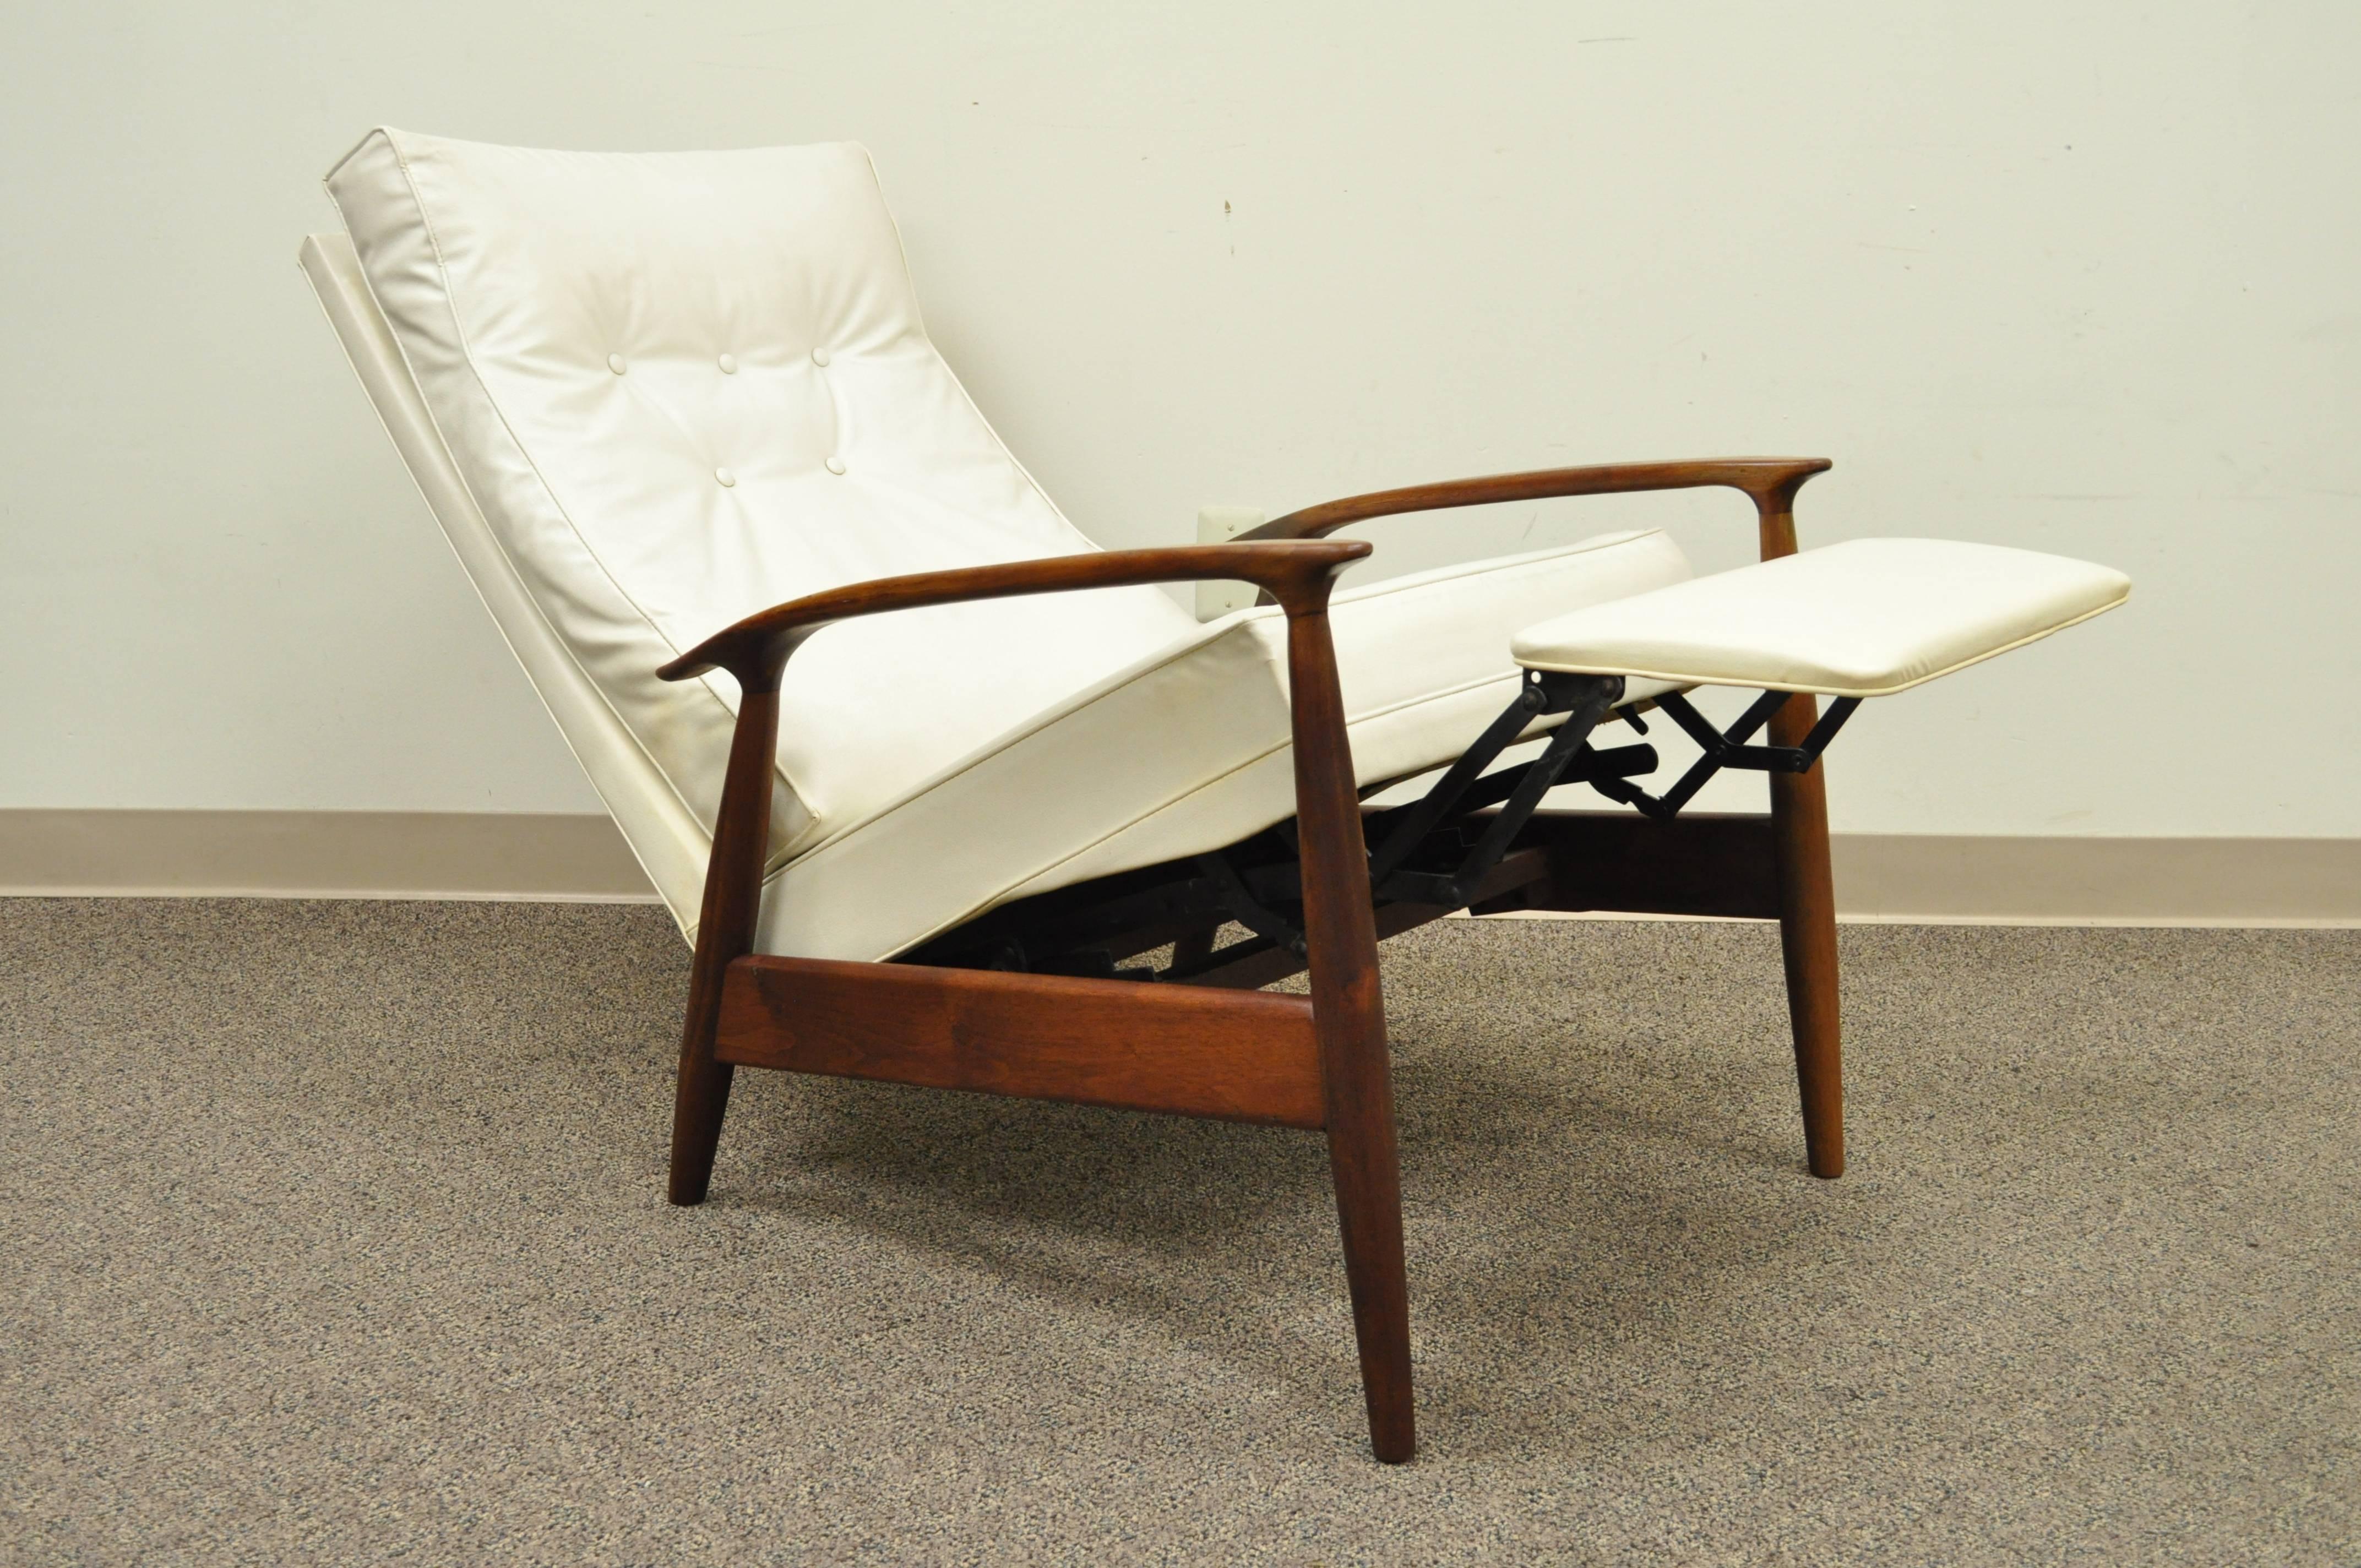 Early Milo Baughman designed sculpted frame reclining walnut lounge chair for James, Incorporated (An early division of Thayer Coggin). Chair features a very comfortable reclining position with flip out footrest and the original white vinyl